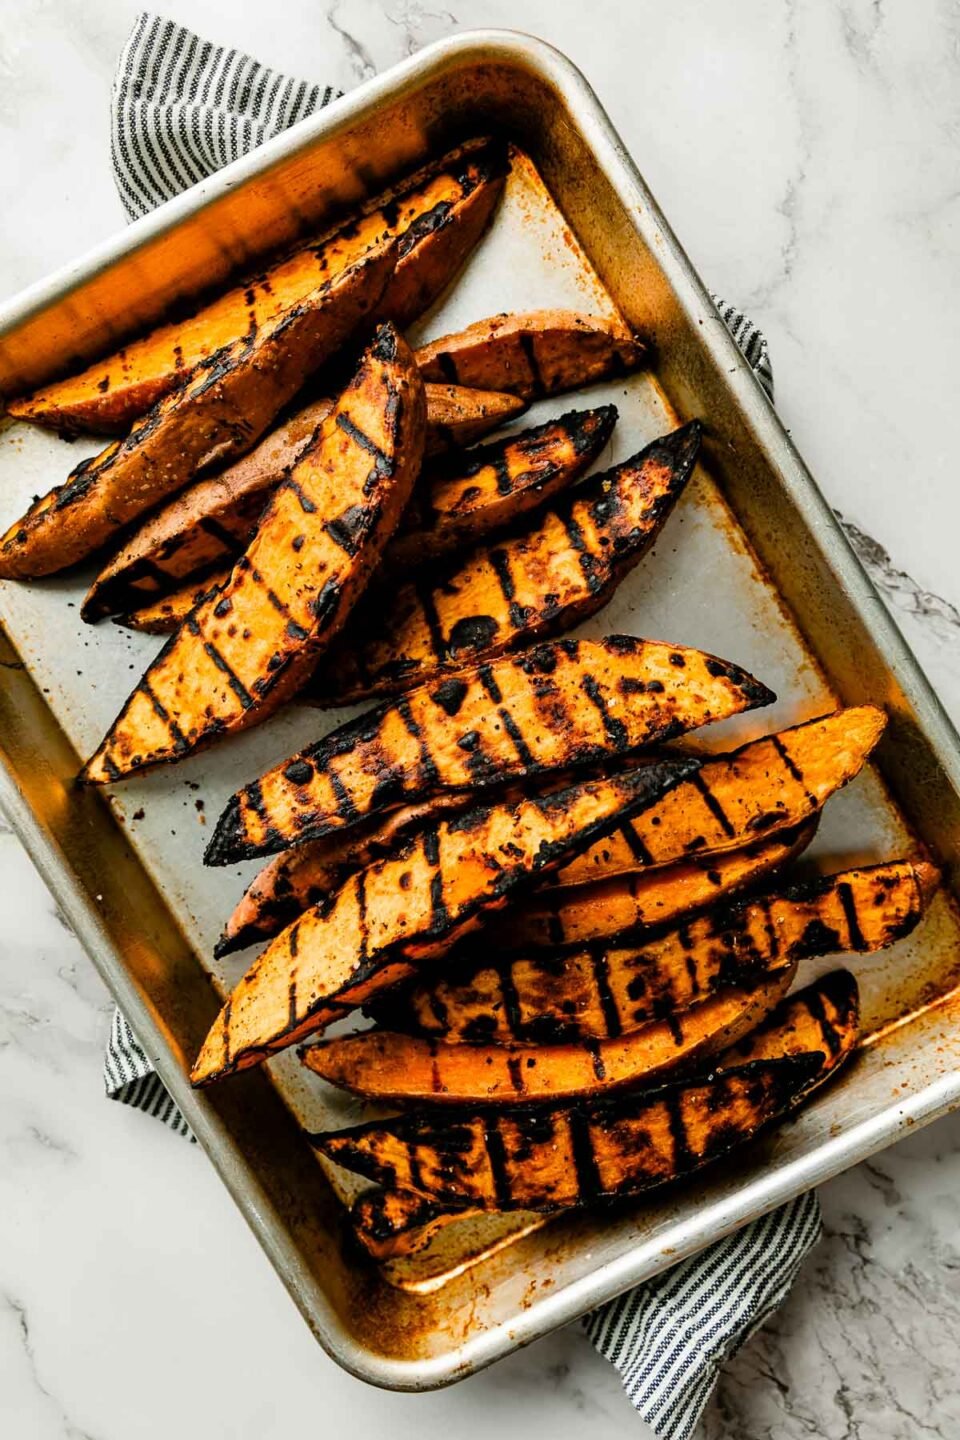 Grilled sweet potato wedges on a metal quarter baking sheet atop a striped linen napkin on a creamy white marble surface.